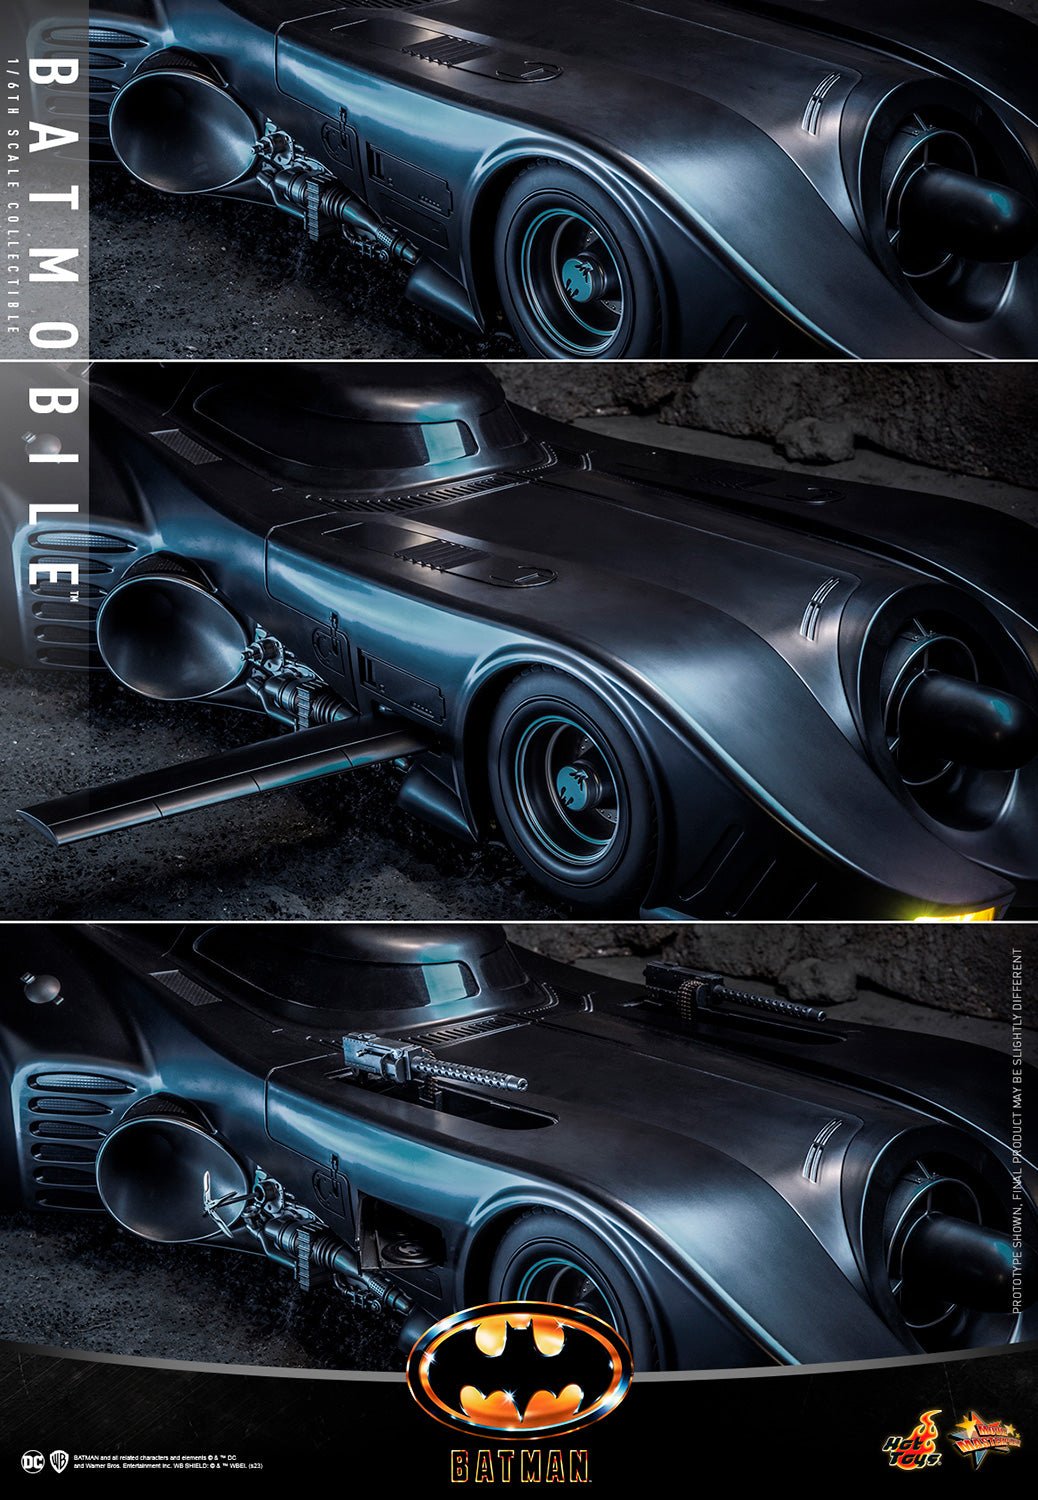 Batman 1989 Limited Edition Black Chrome Batmobile Exclusive Is Back up for  Pre-Order